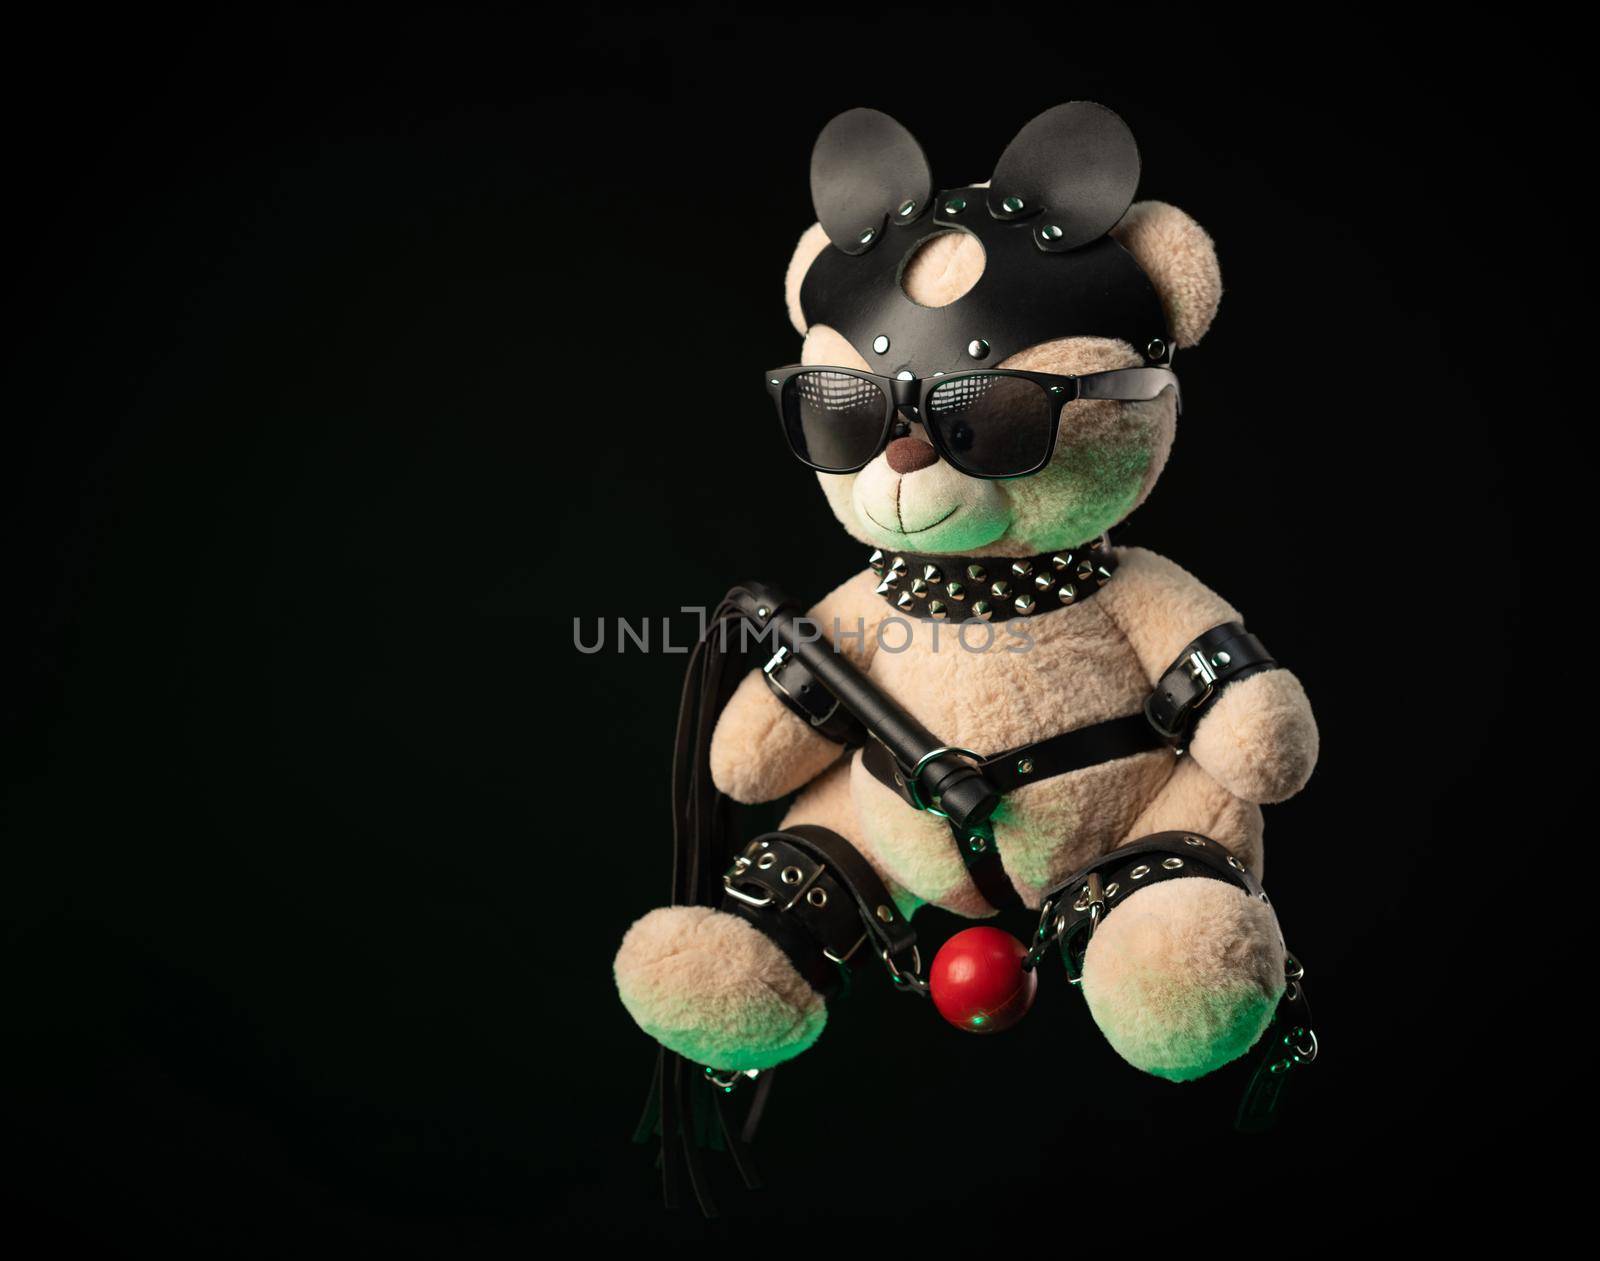 bdsm accessories on a teddy bear by Rotozey